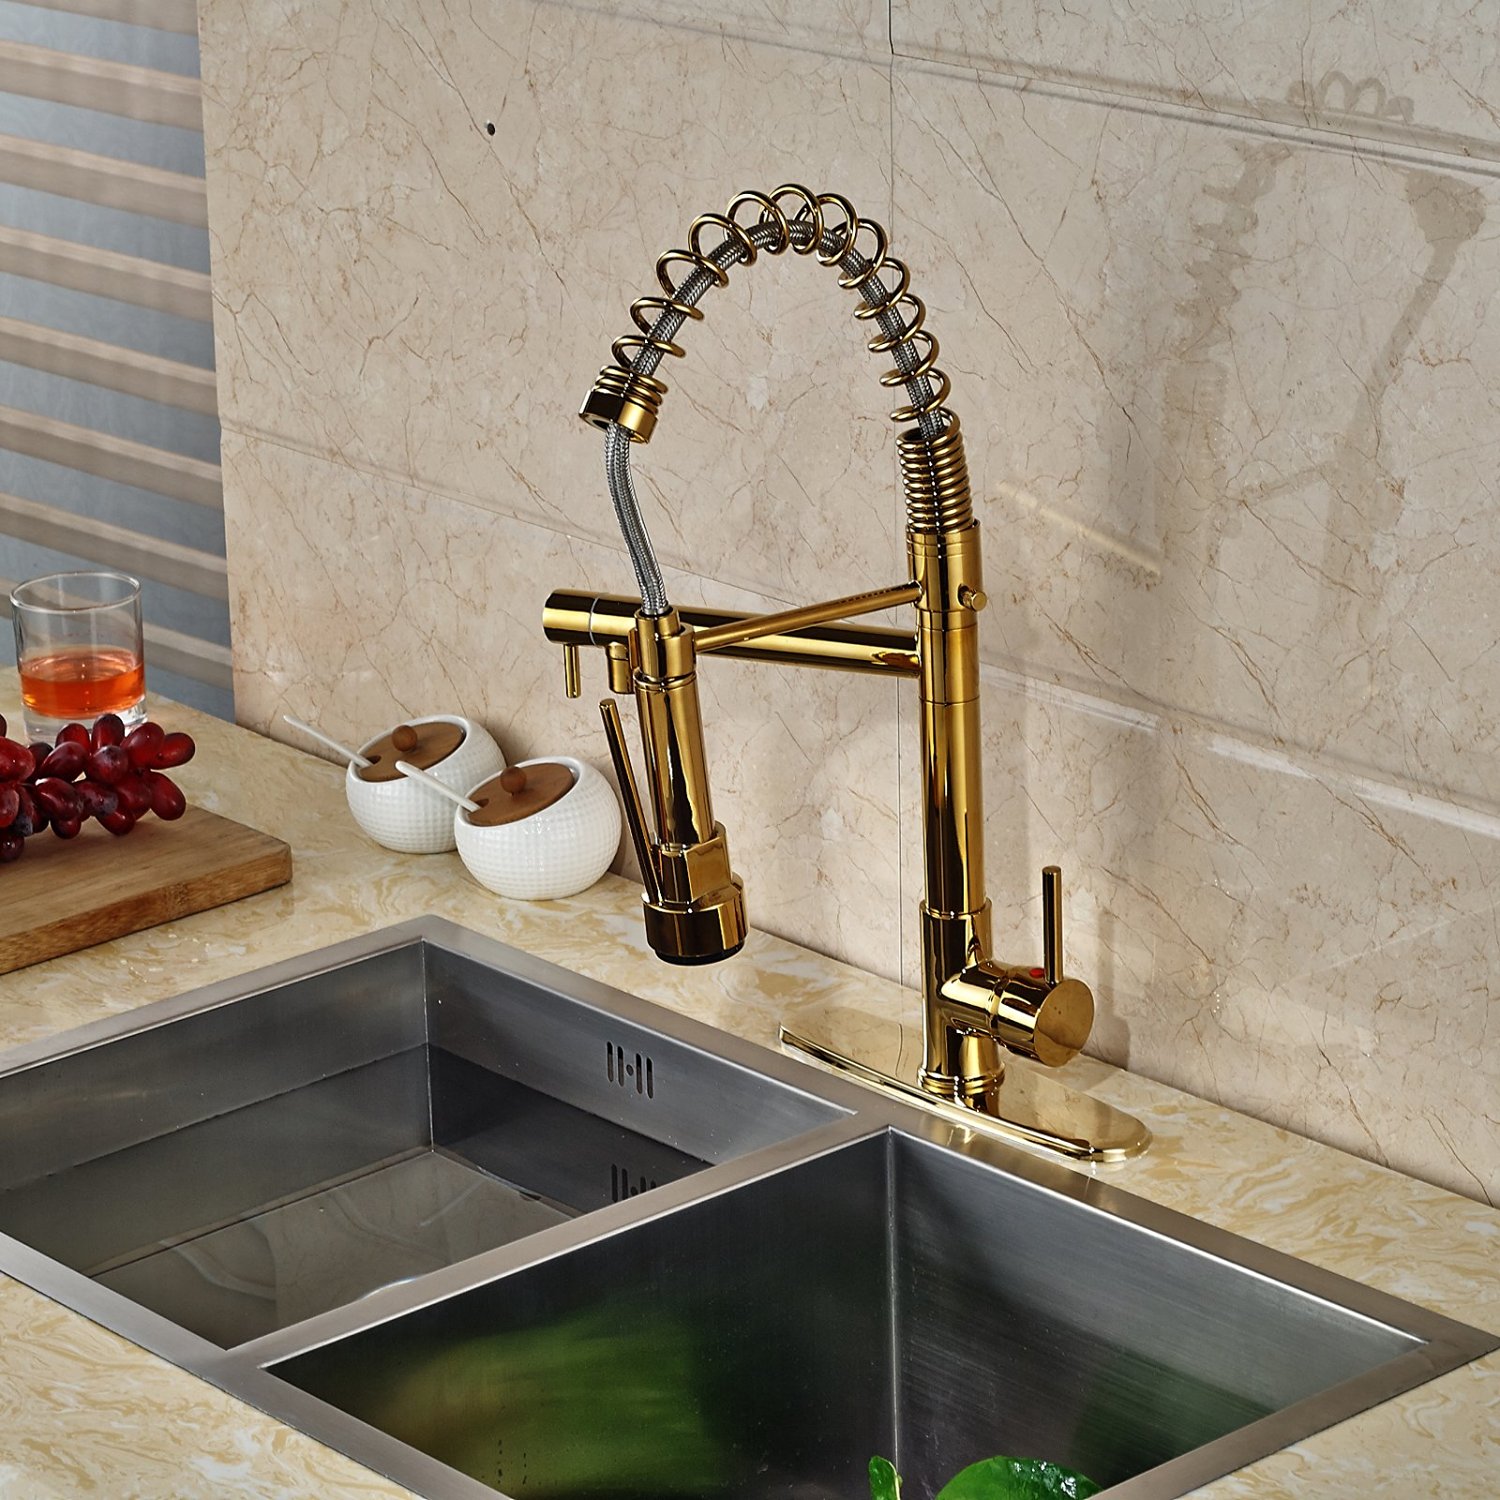 Discount Kitchen Sinks And Faucets Exquisite Kitchen Faucets Merge